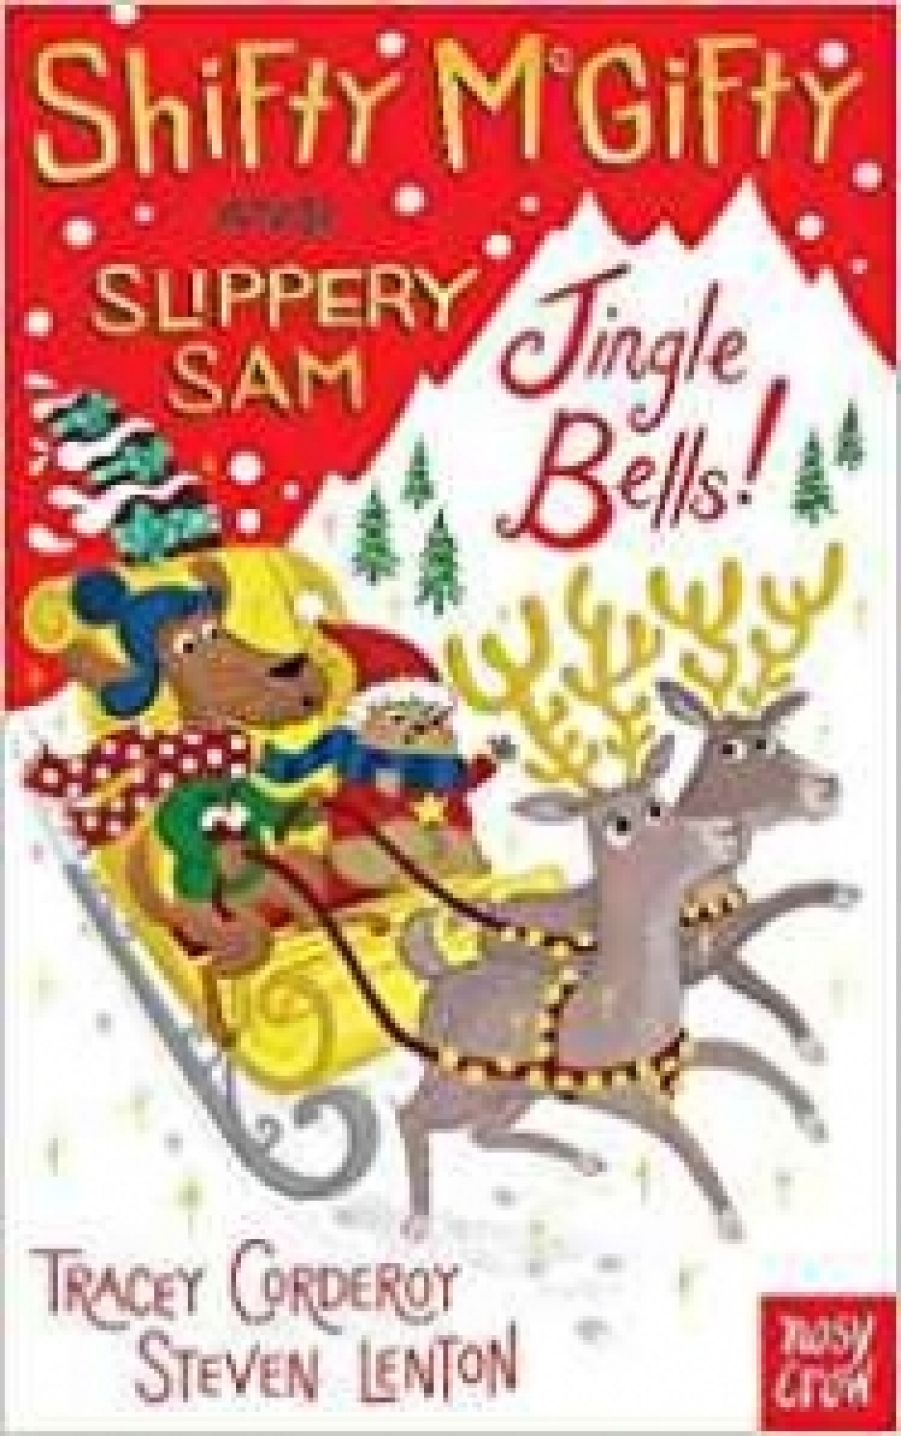 Corderoy Tracey Shifty McGifty and Slippery Sam: Jingle Bells! 